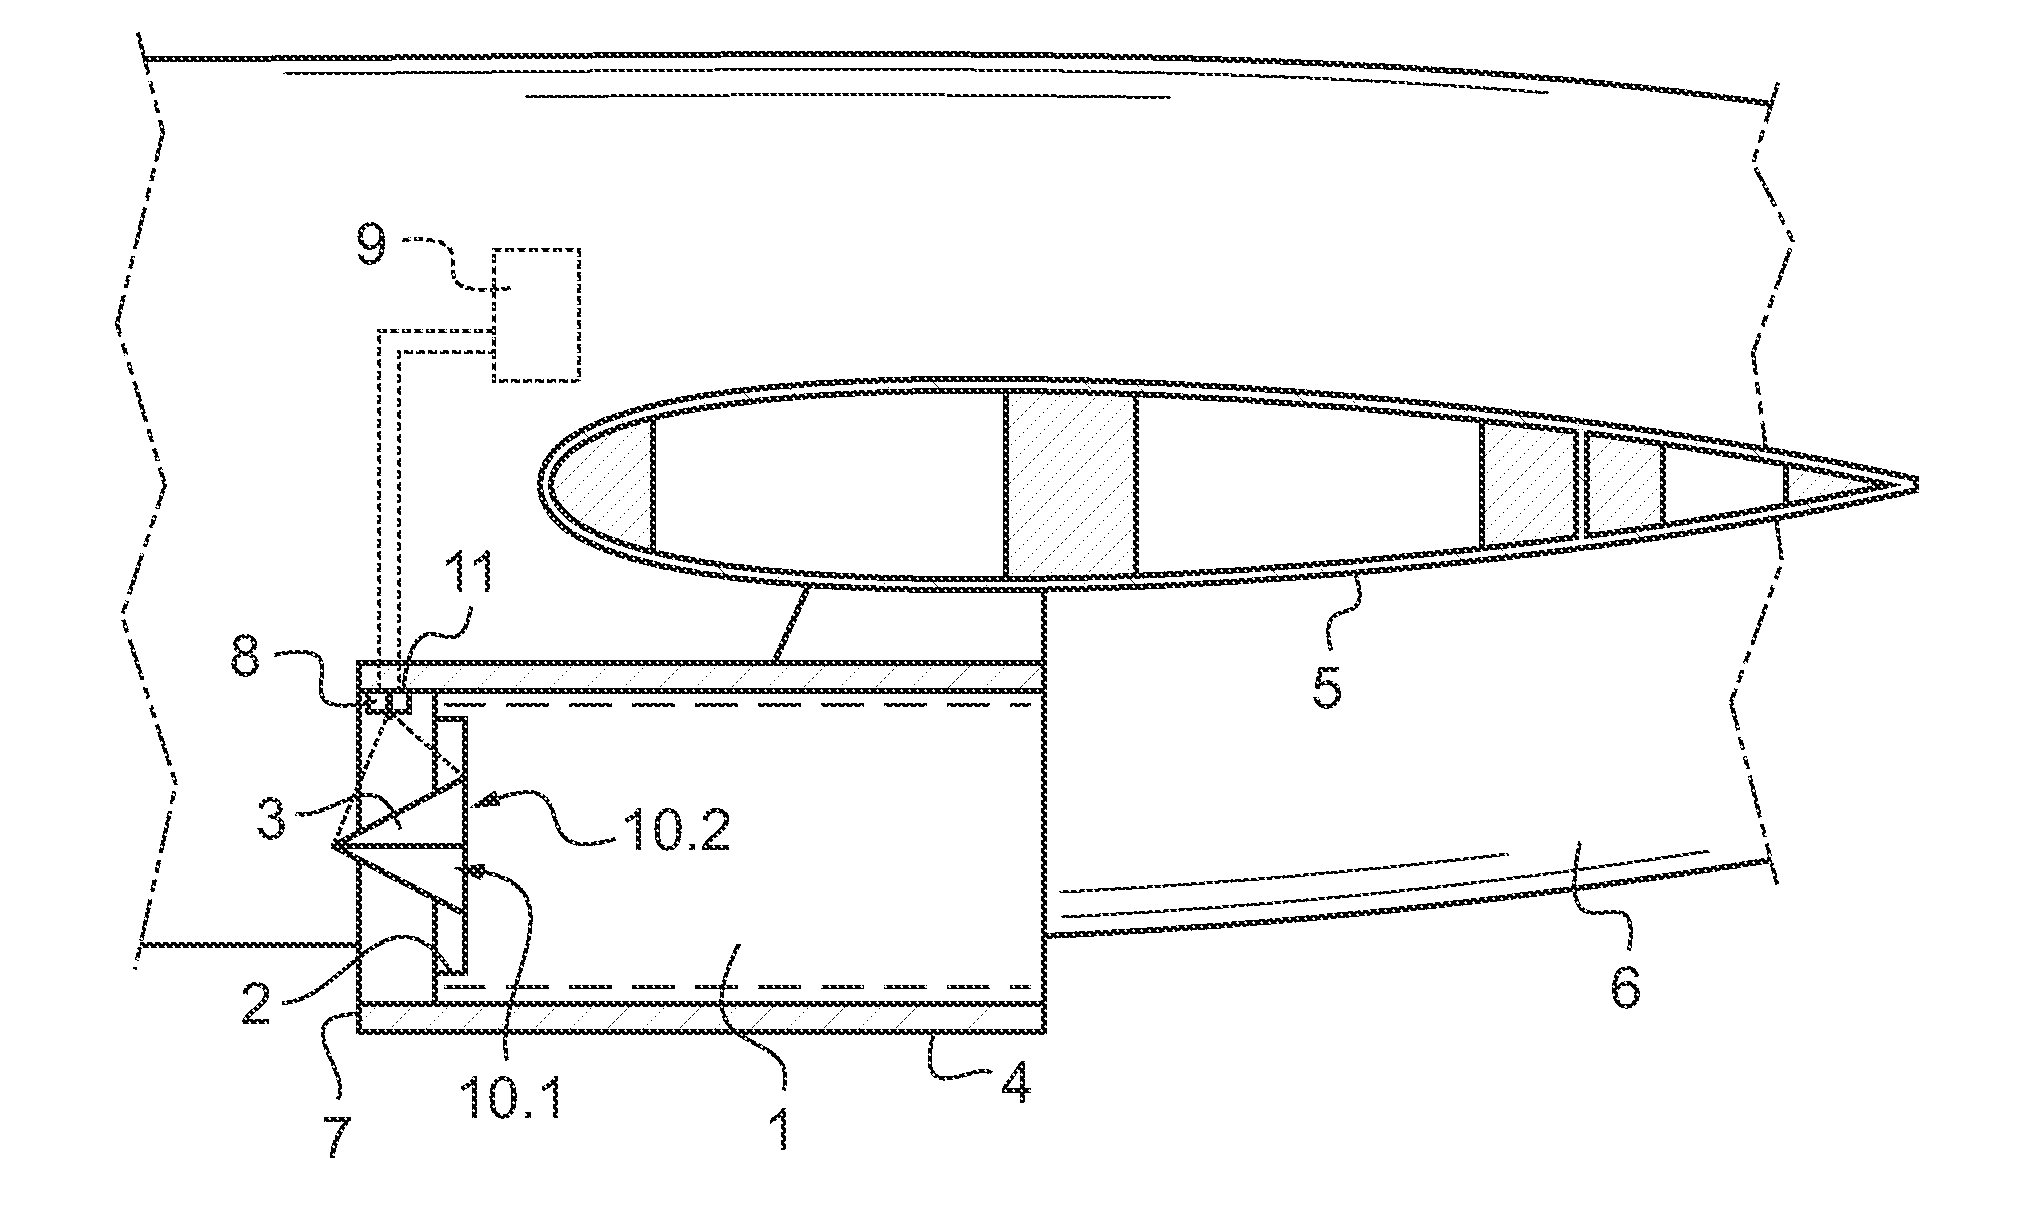 Engine and pod assembly for an aircraft, equipped with an Anti-icing device